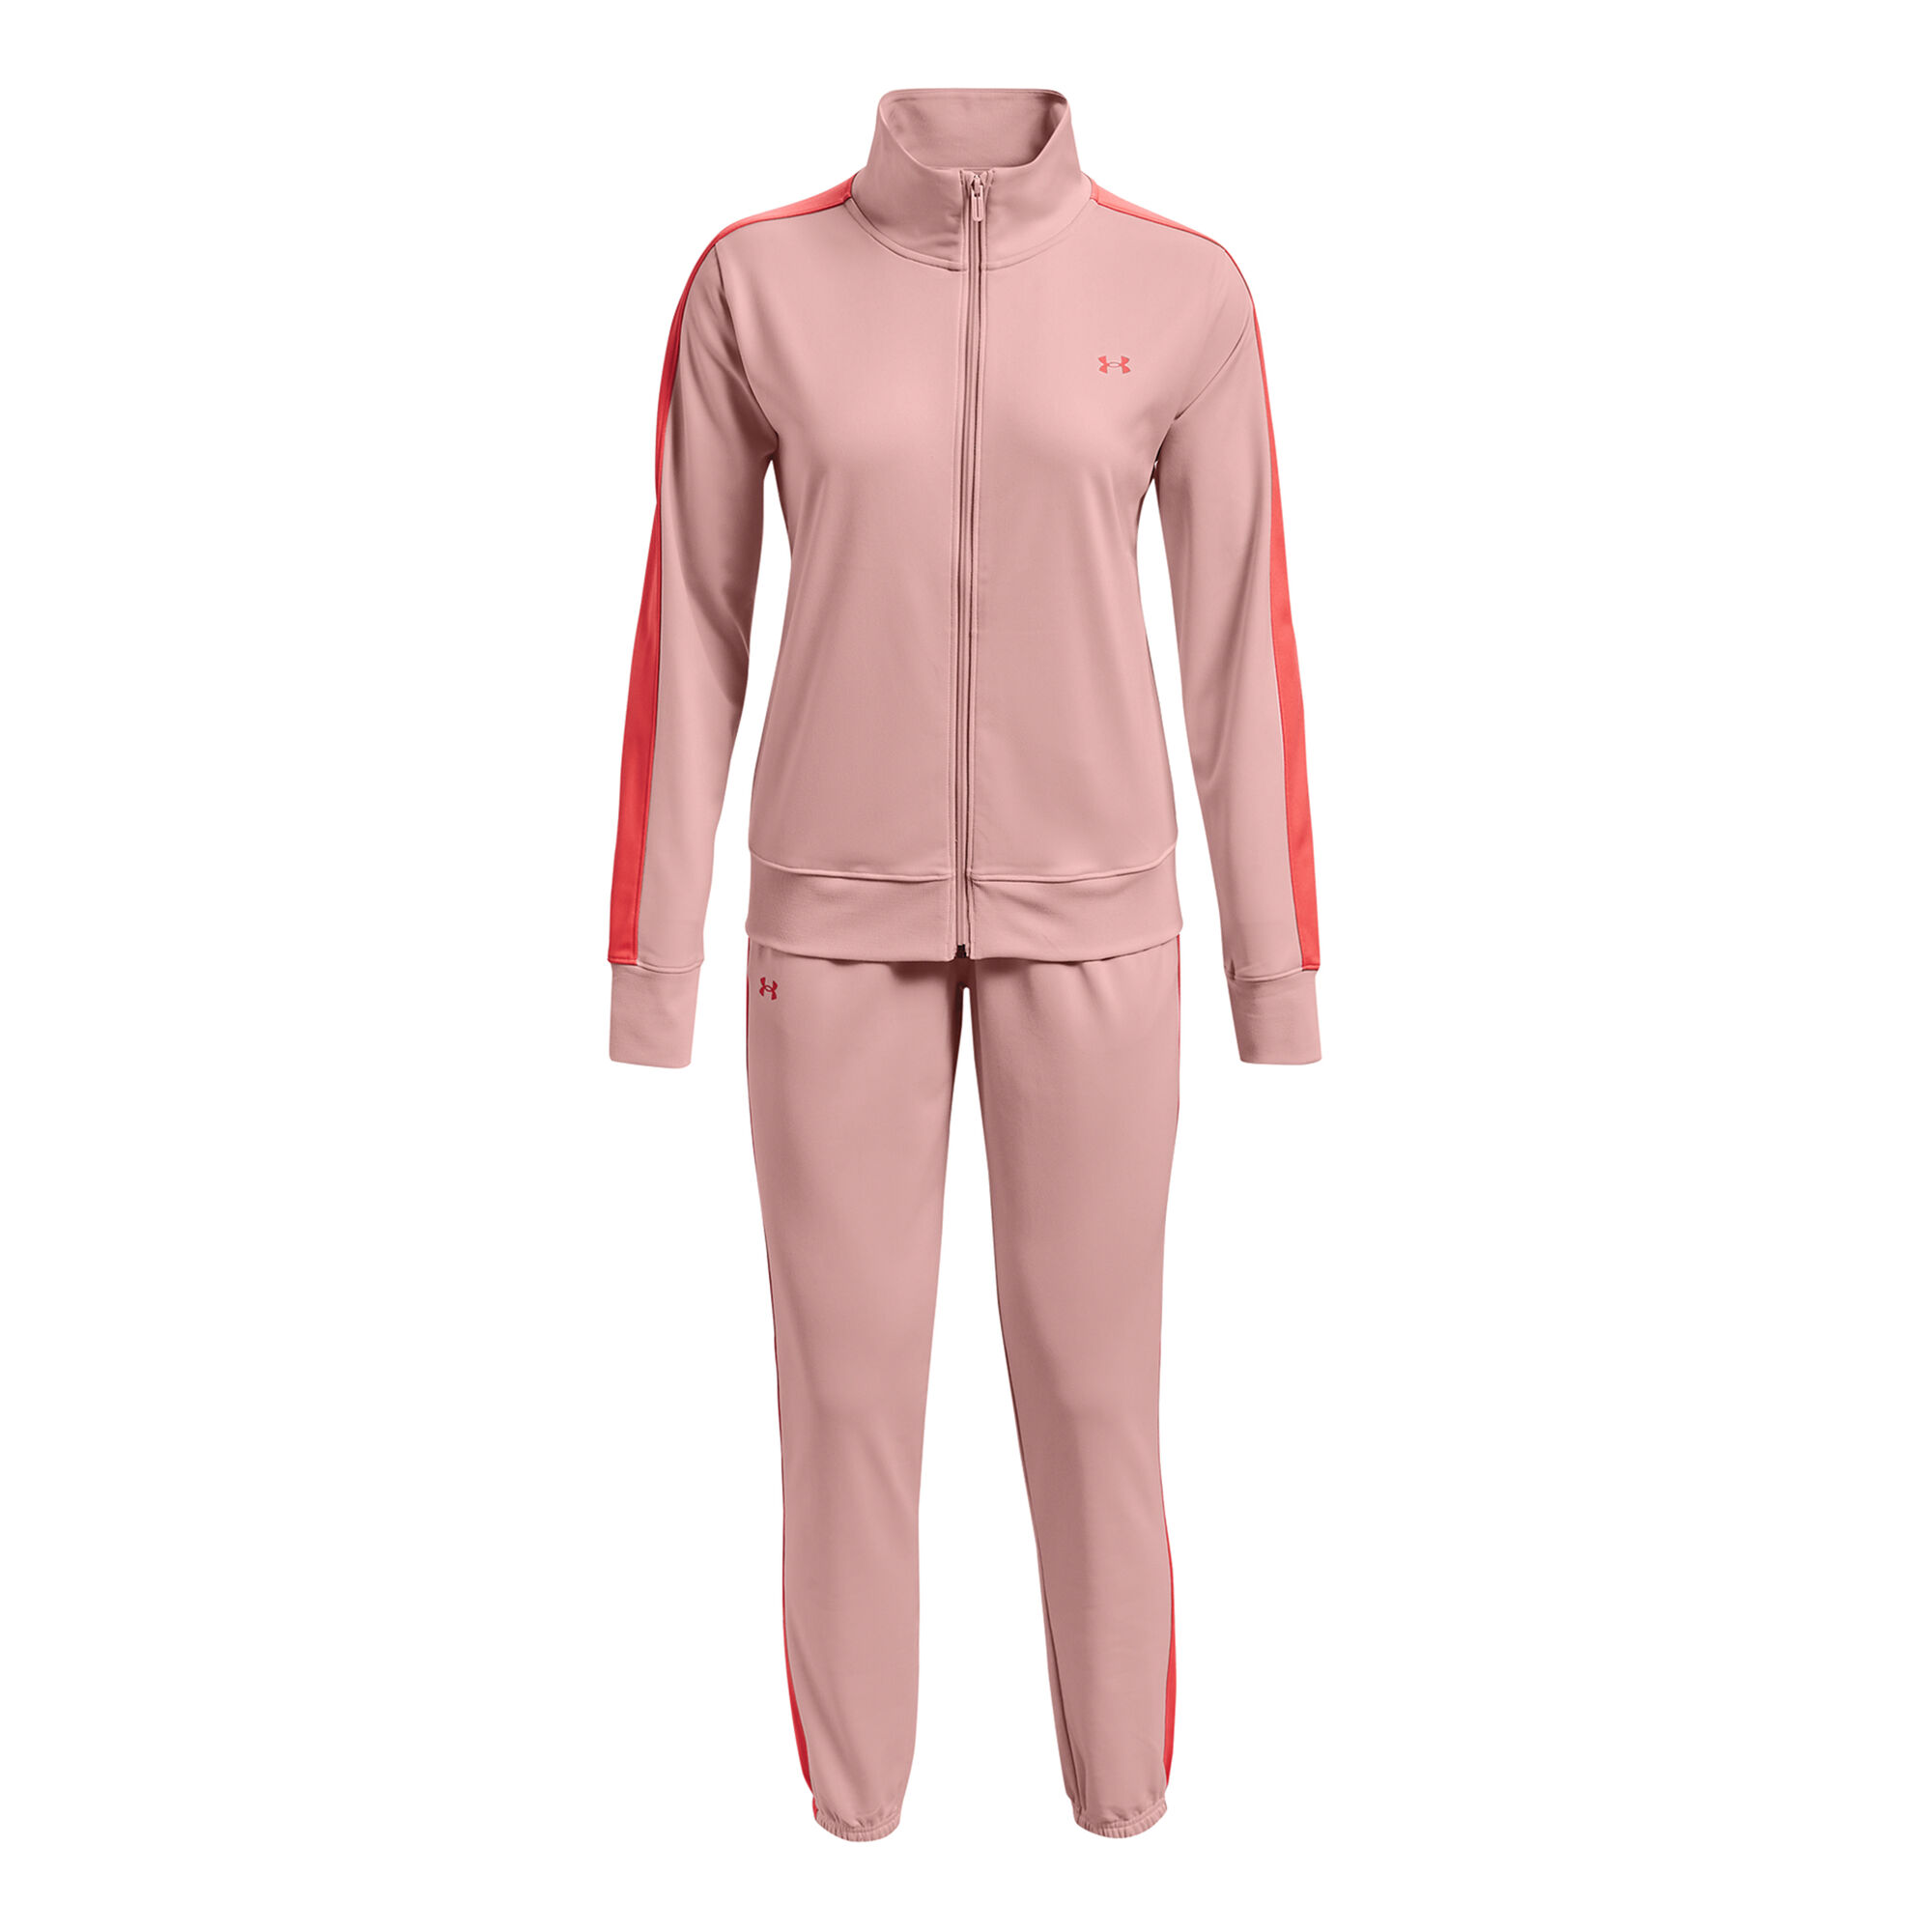 Tricot Tracksuit Women - Pink